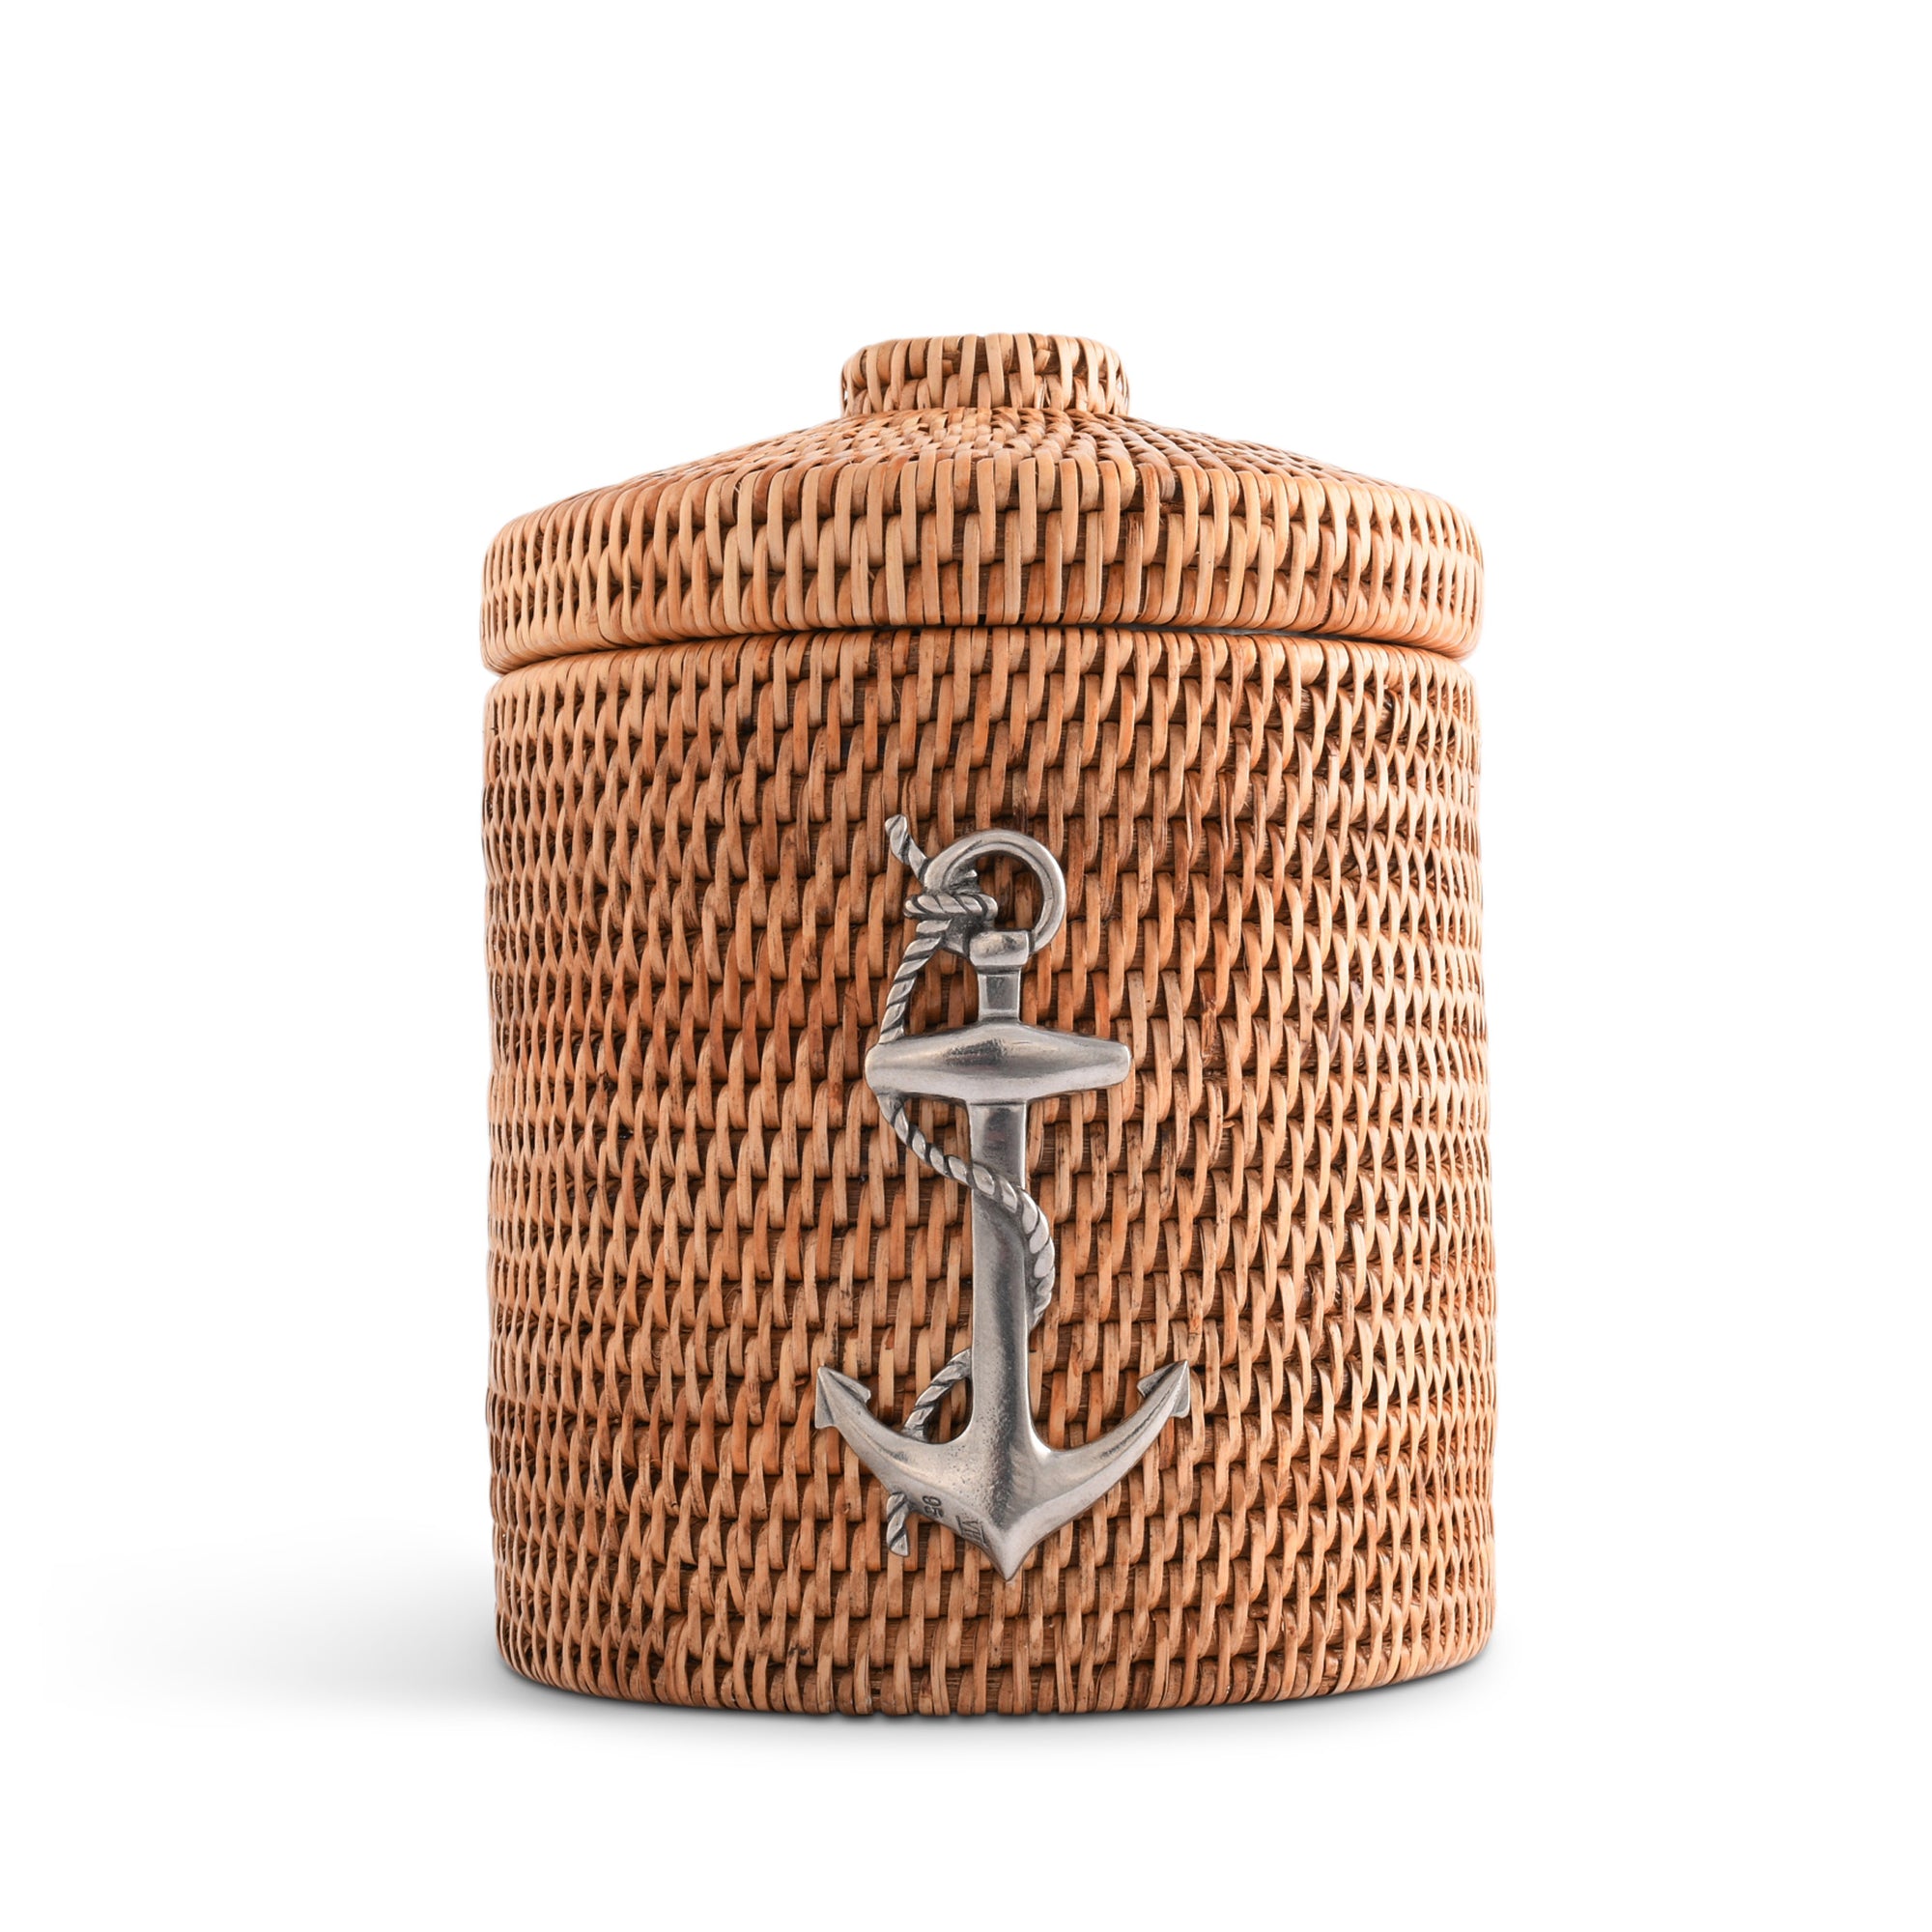 Vagabond House Anchor Hand Woven Wicker Rattan Lidded Ice Bucket Product Image